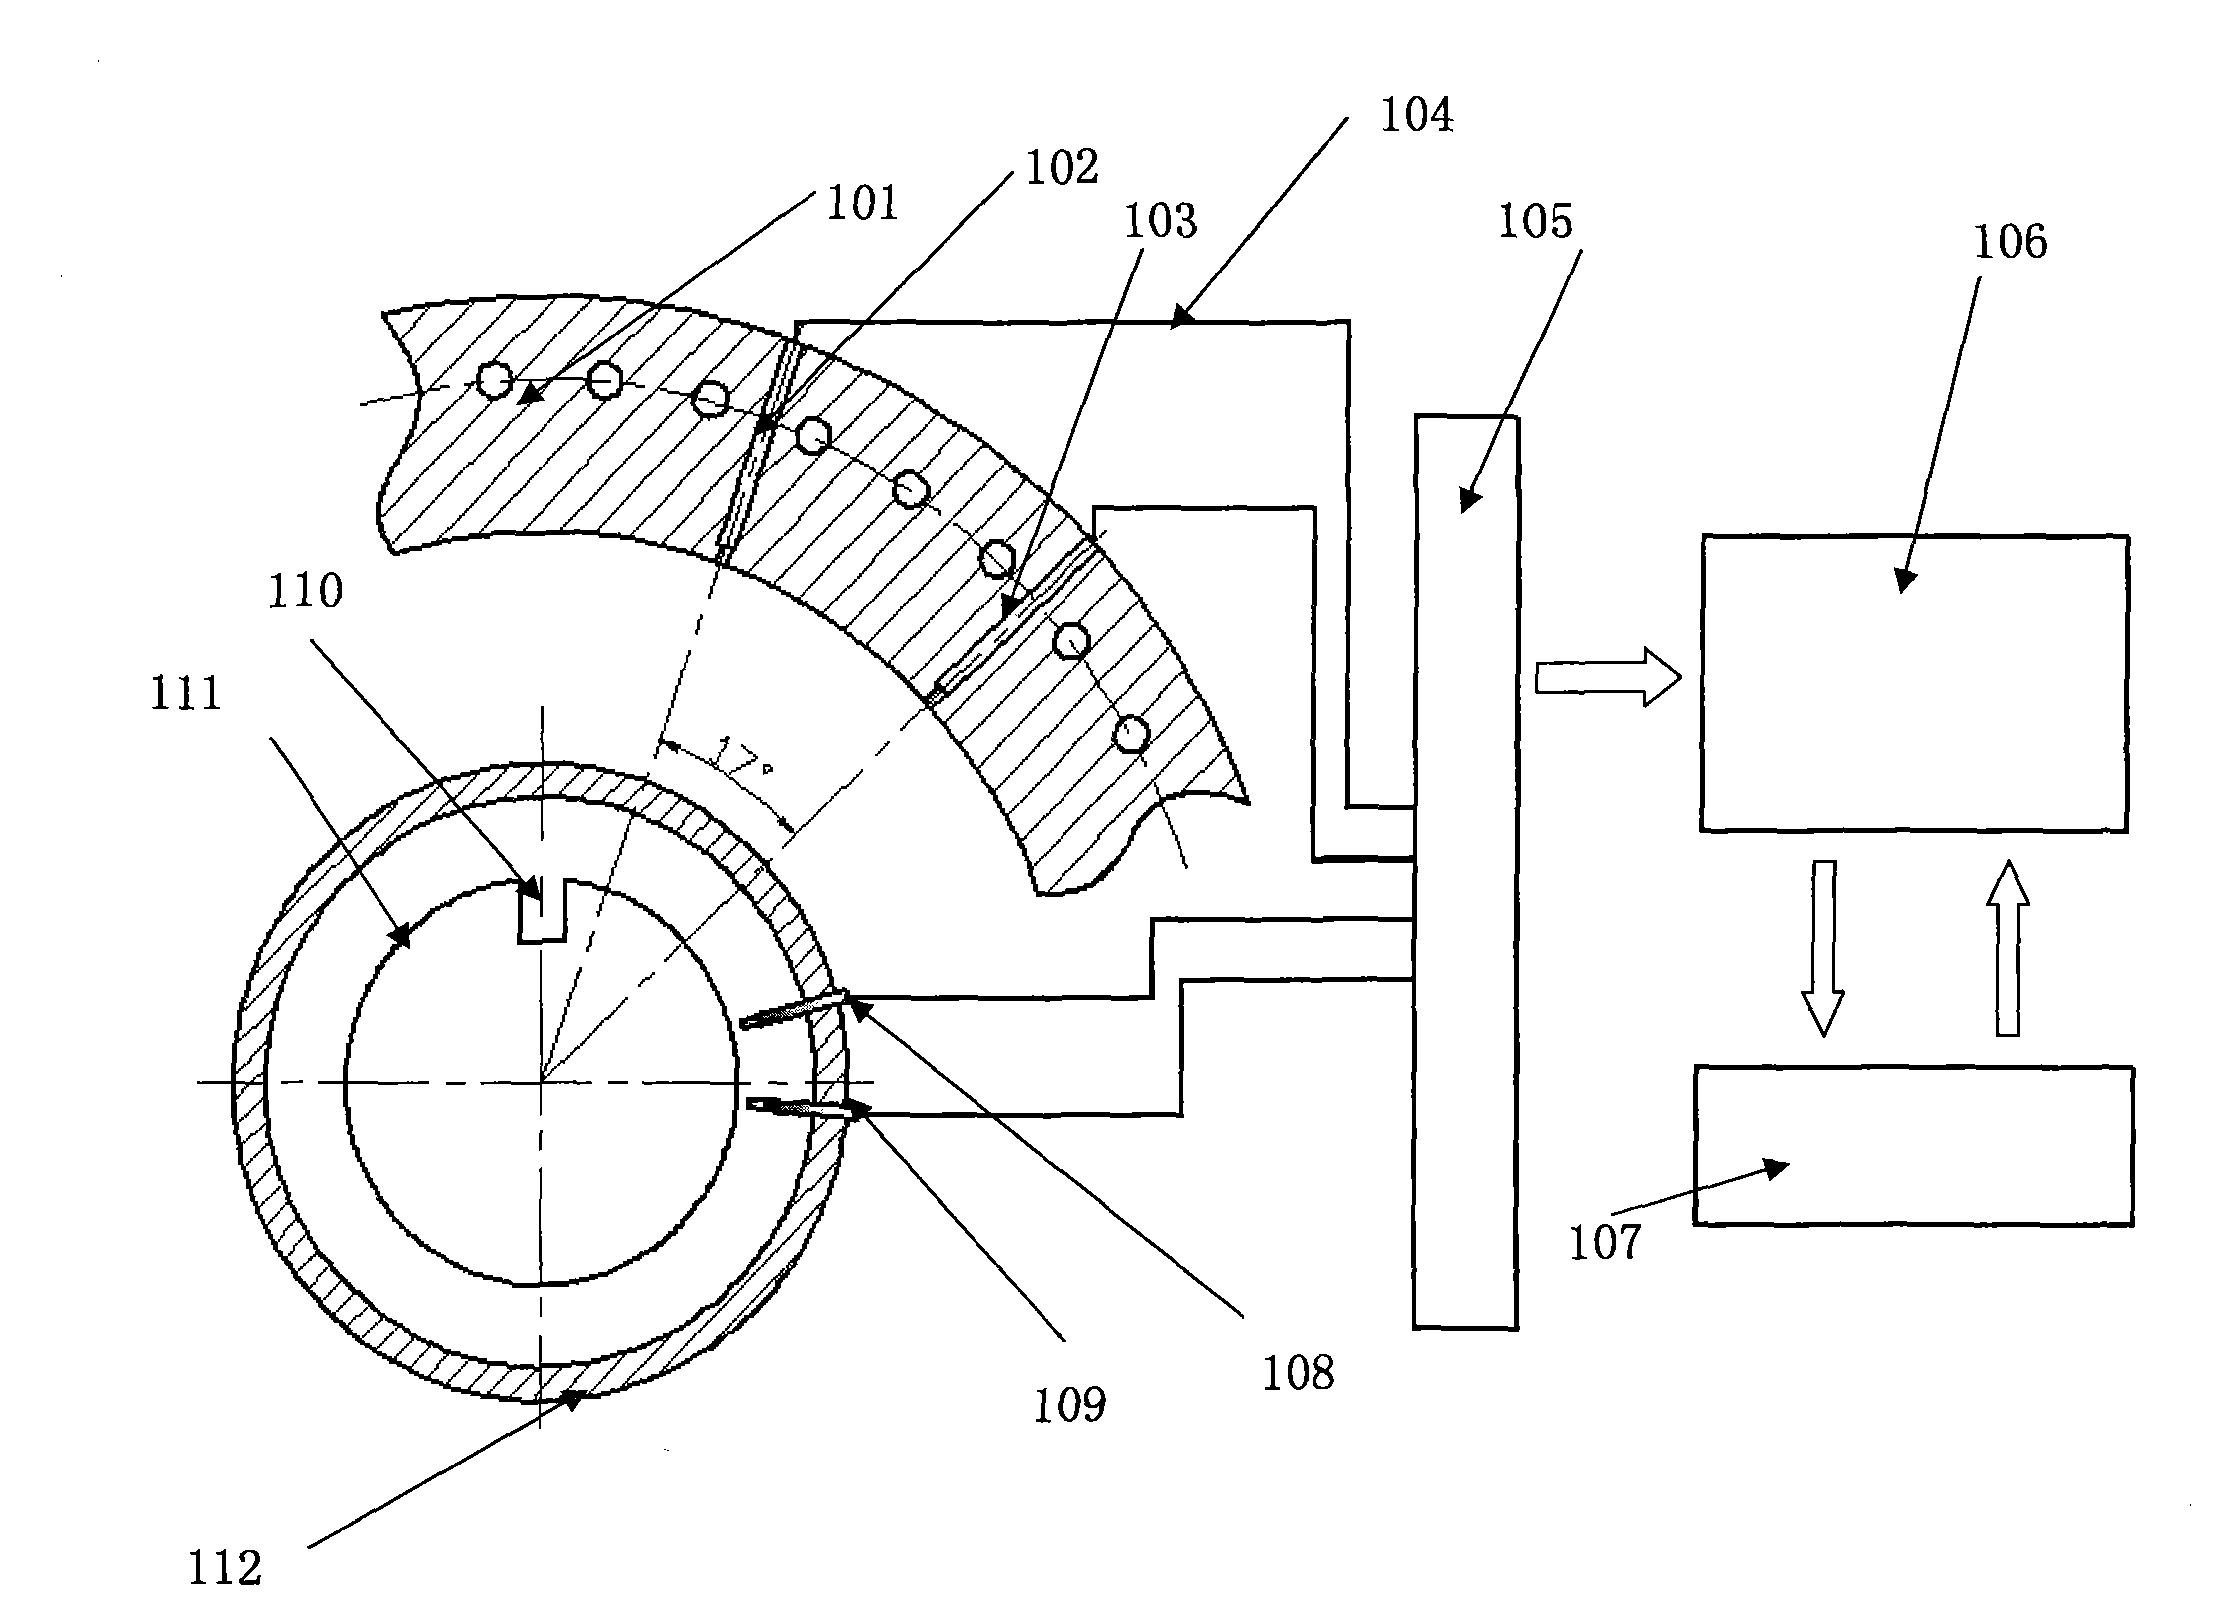 Real-time on-line monitoring apparatus of blade vibration of flue gas turbine